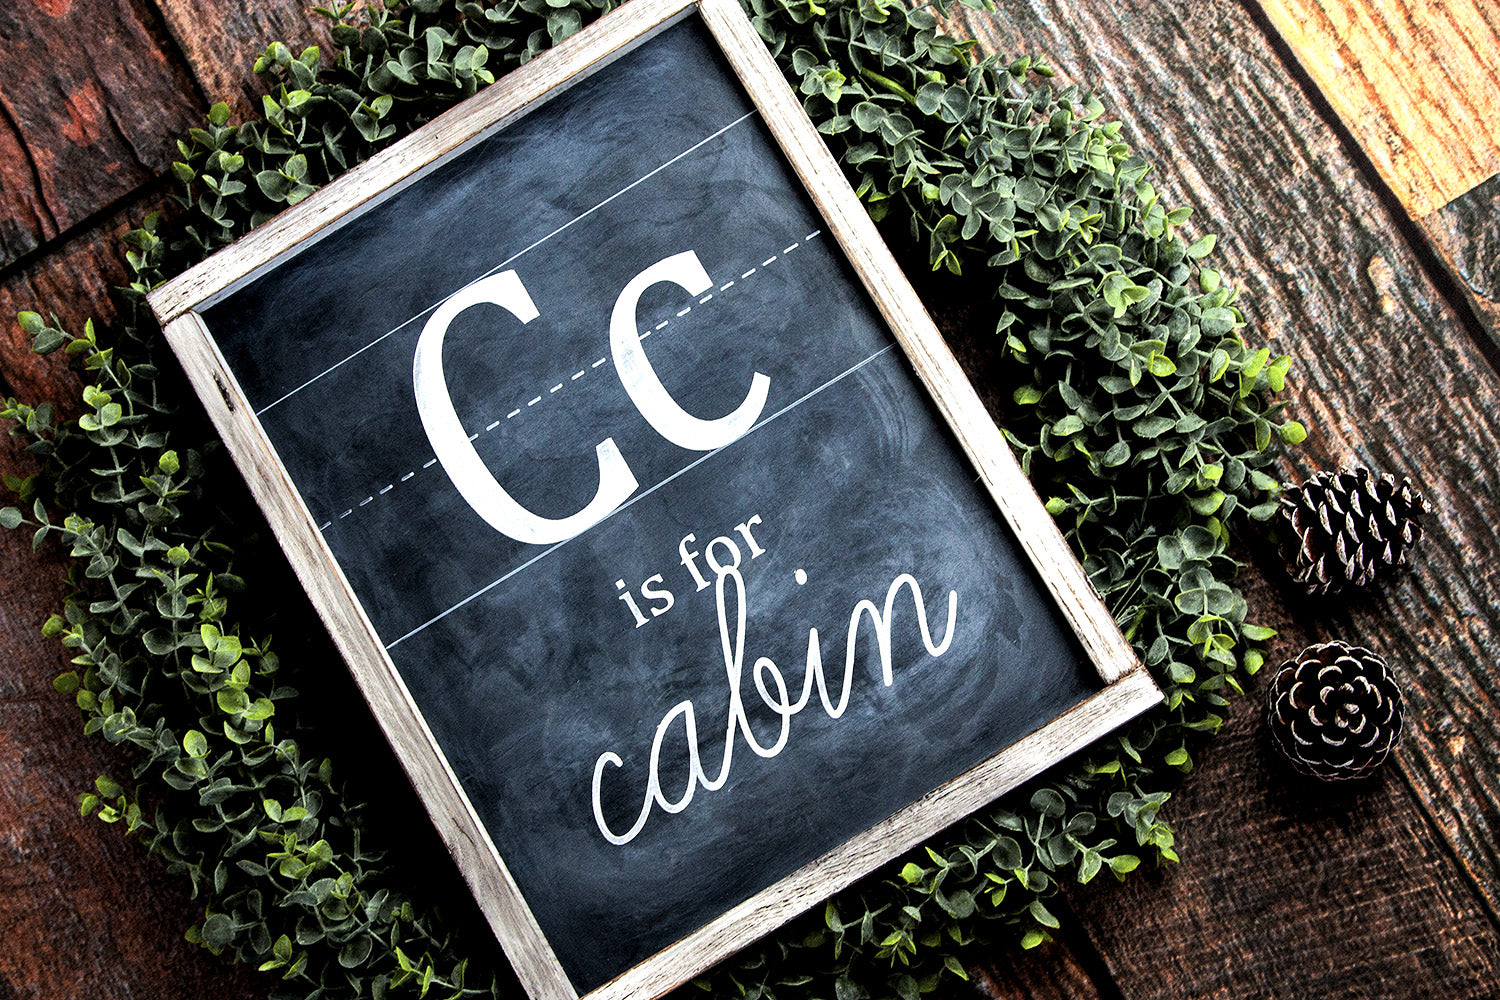 C is For Cabin Chalkboard Sign 18x14